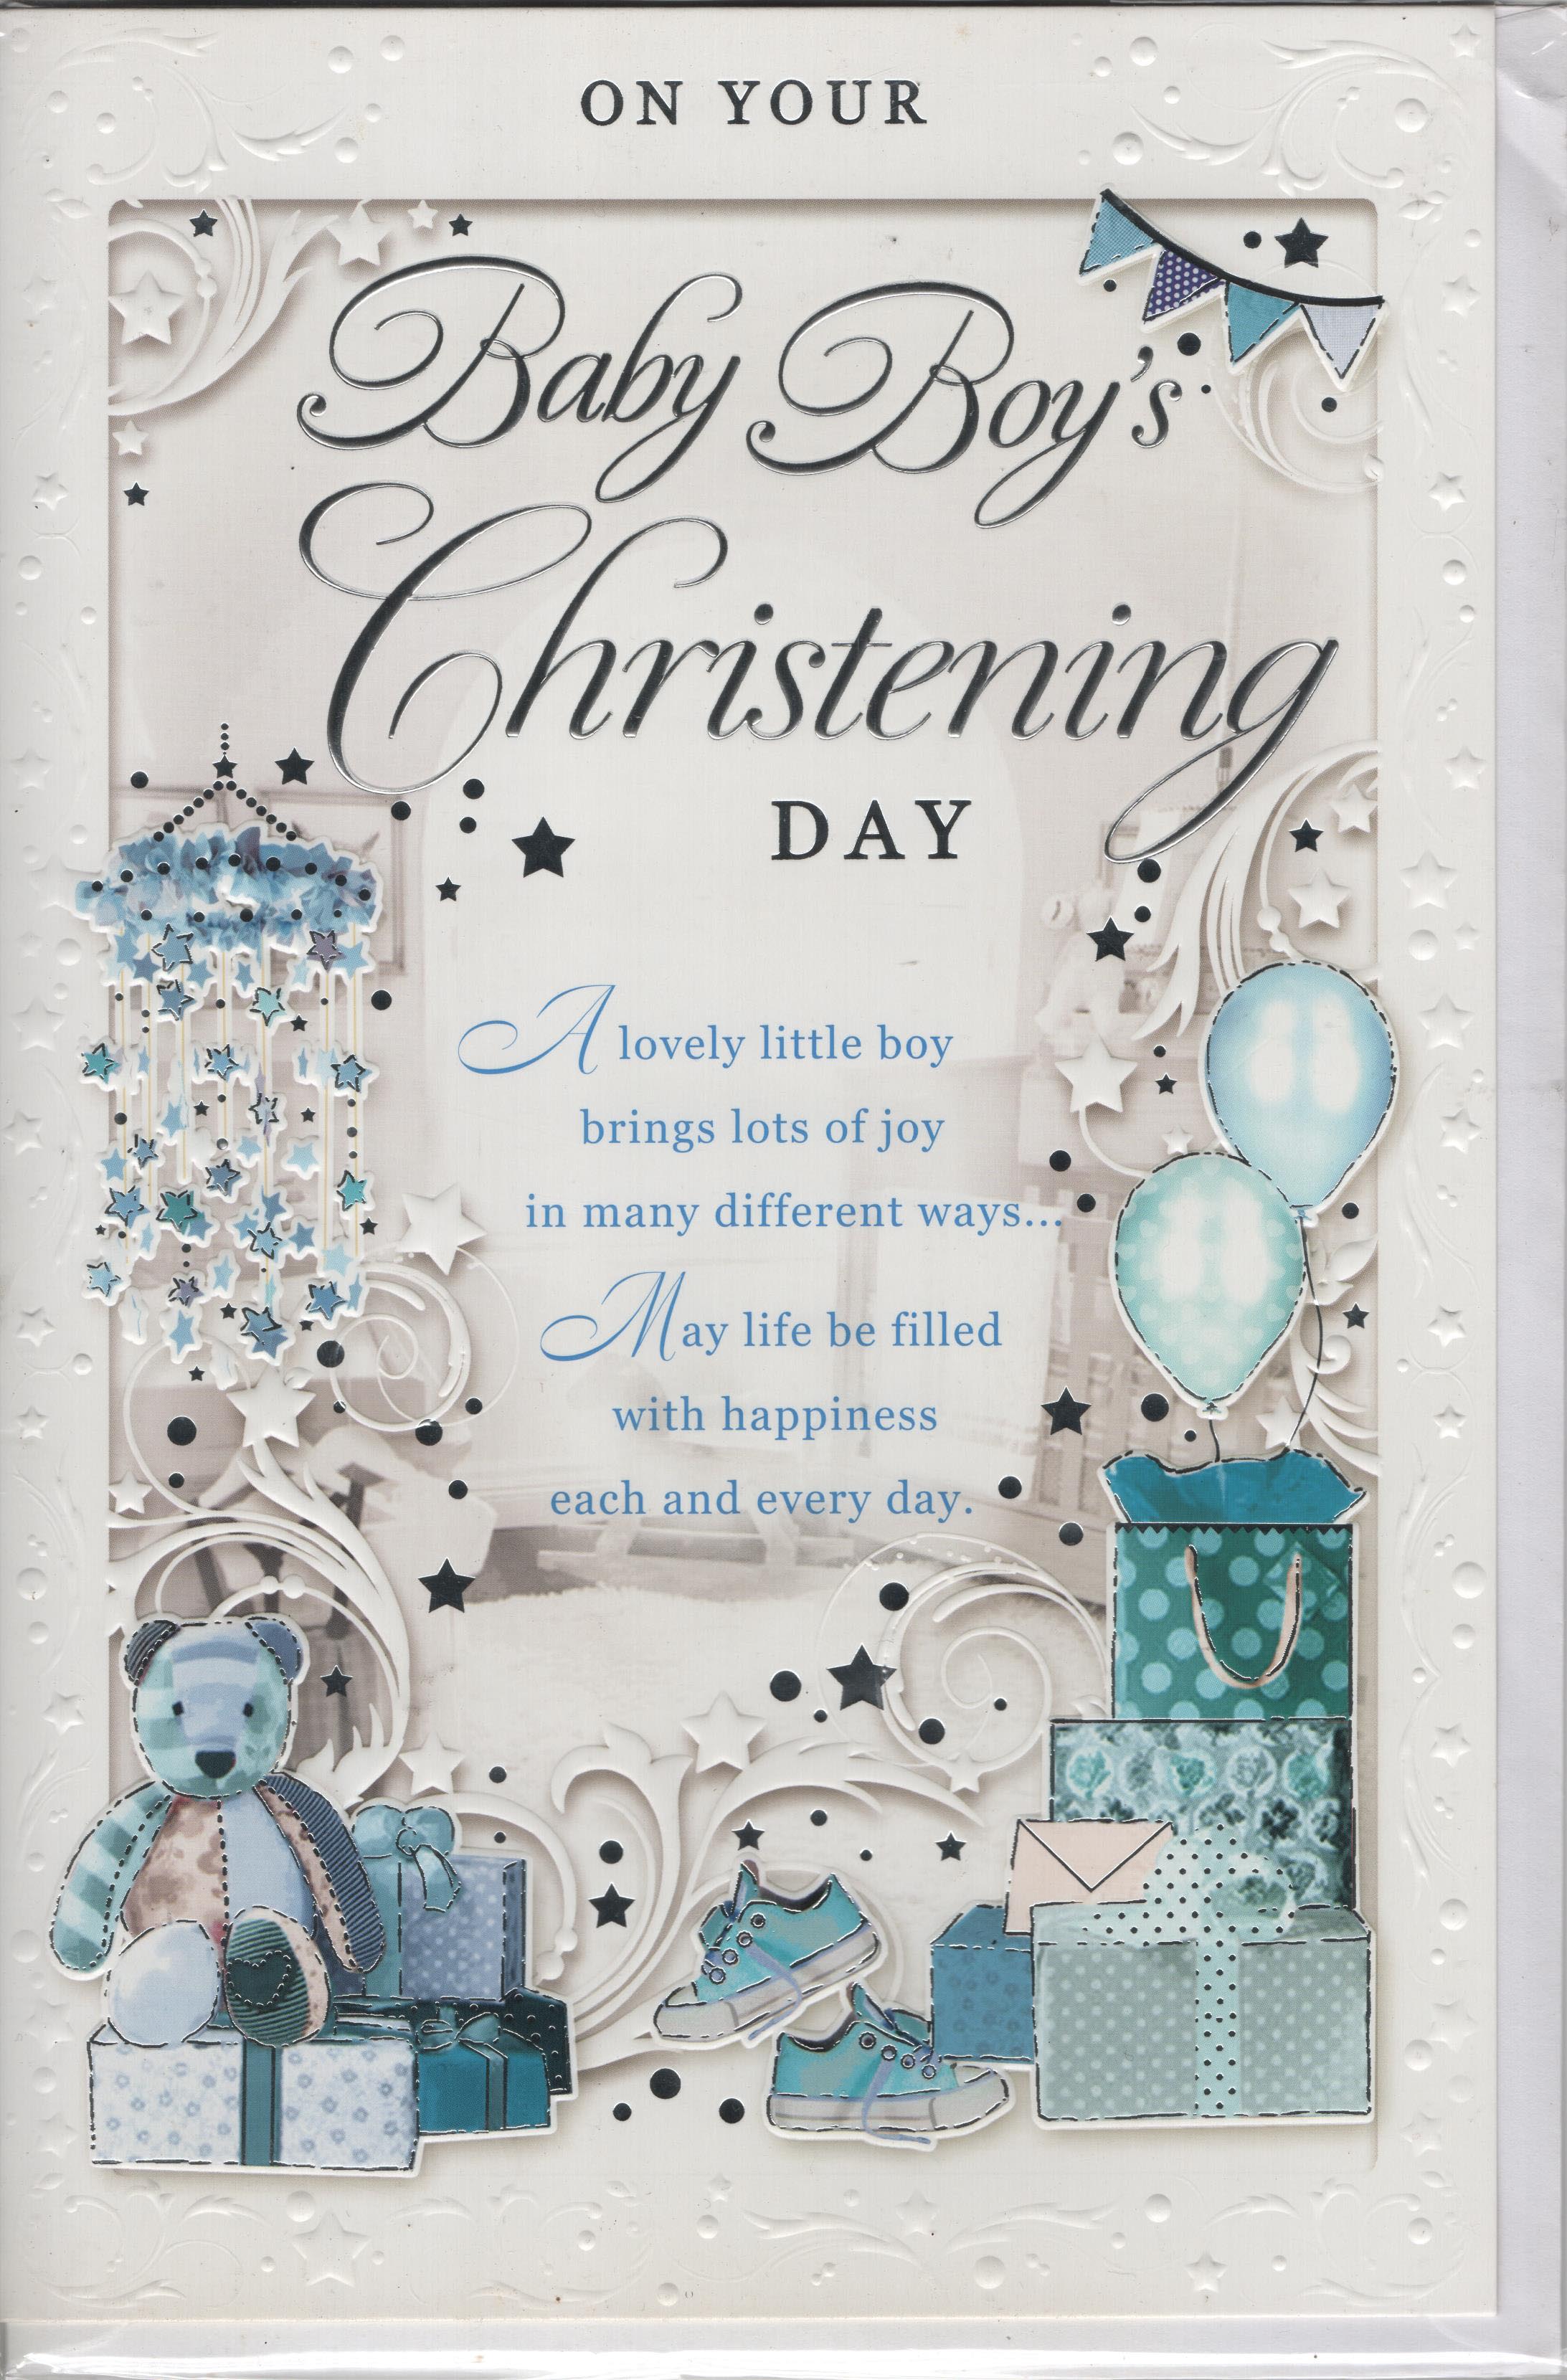 On Your Baby Boy's Christening Day (OP125011)